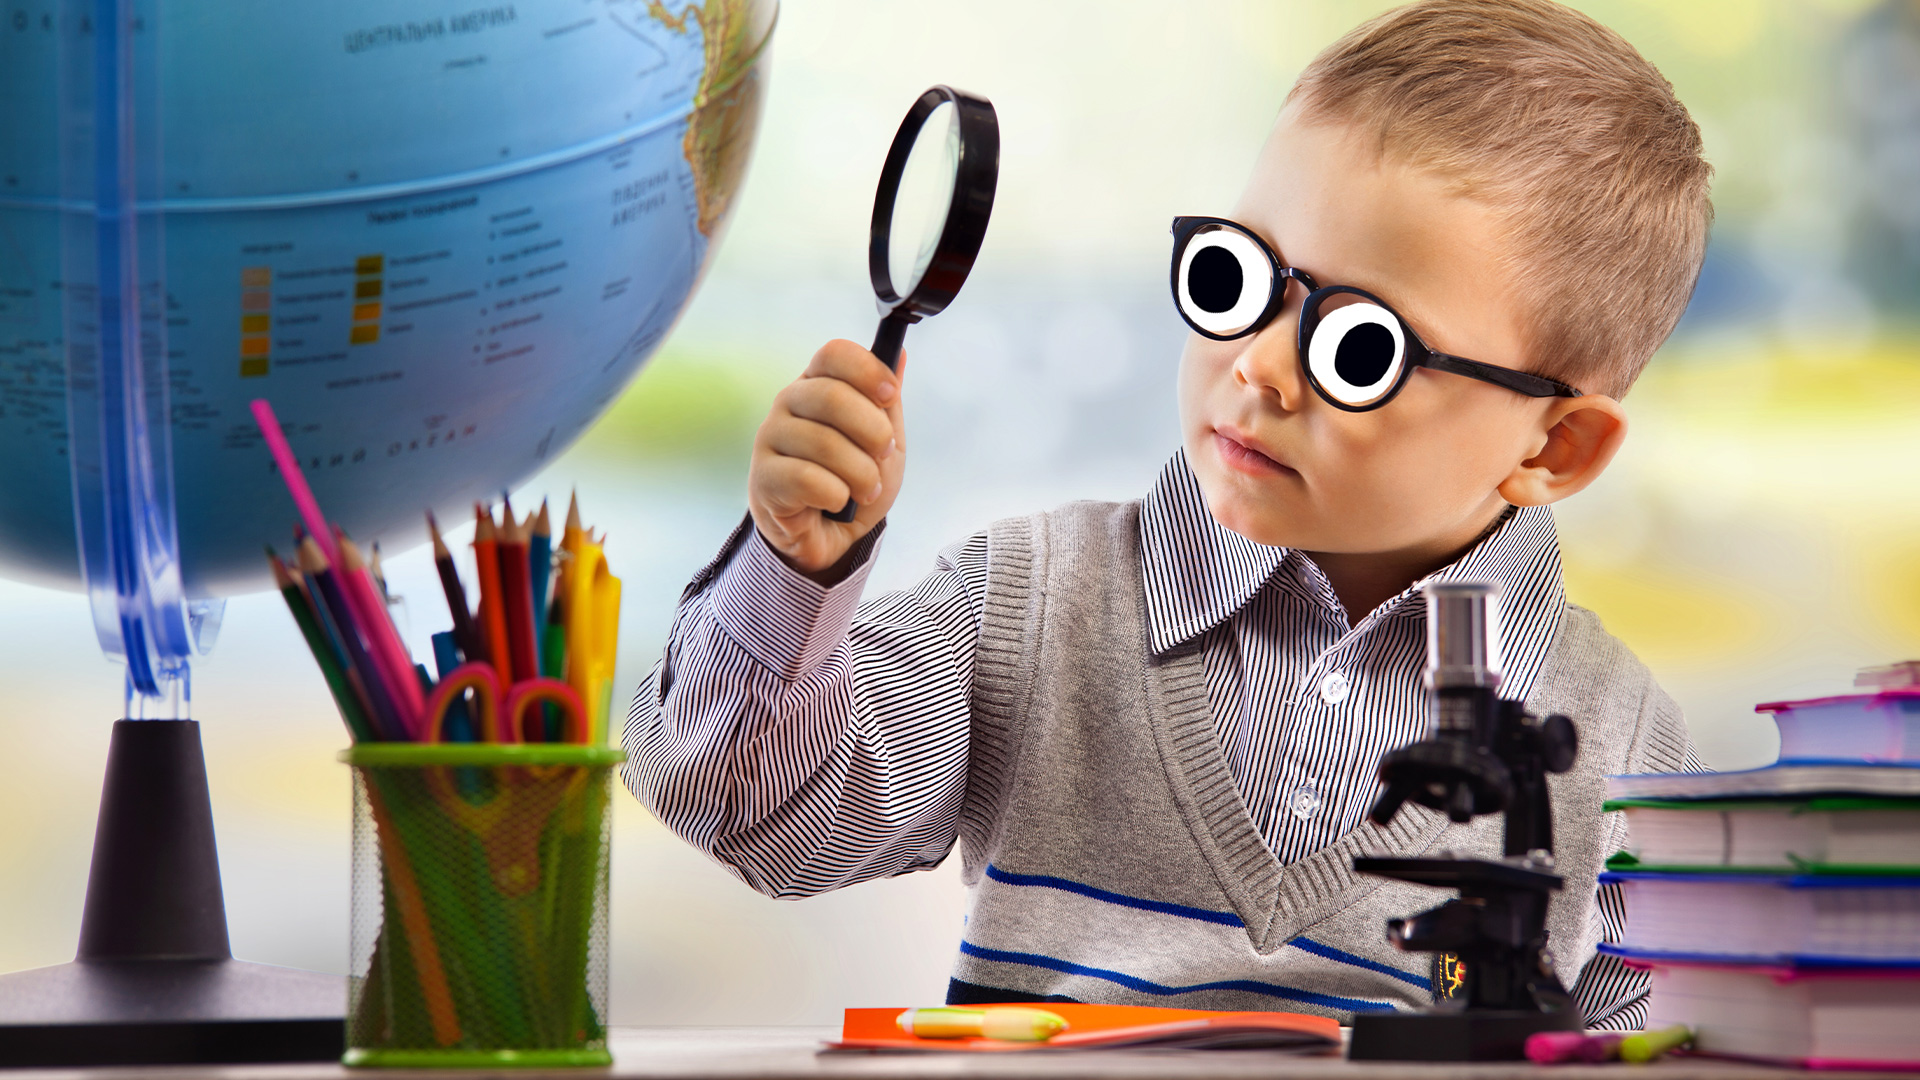 A boy looking at a globe with a magnifying glass